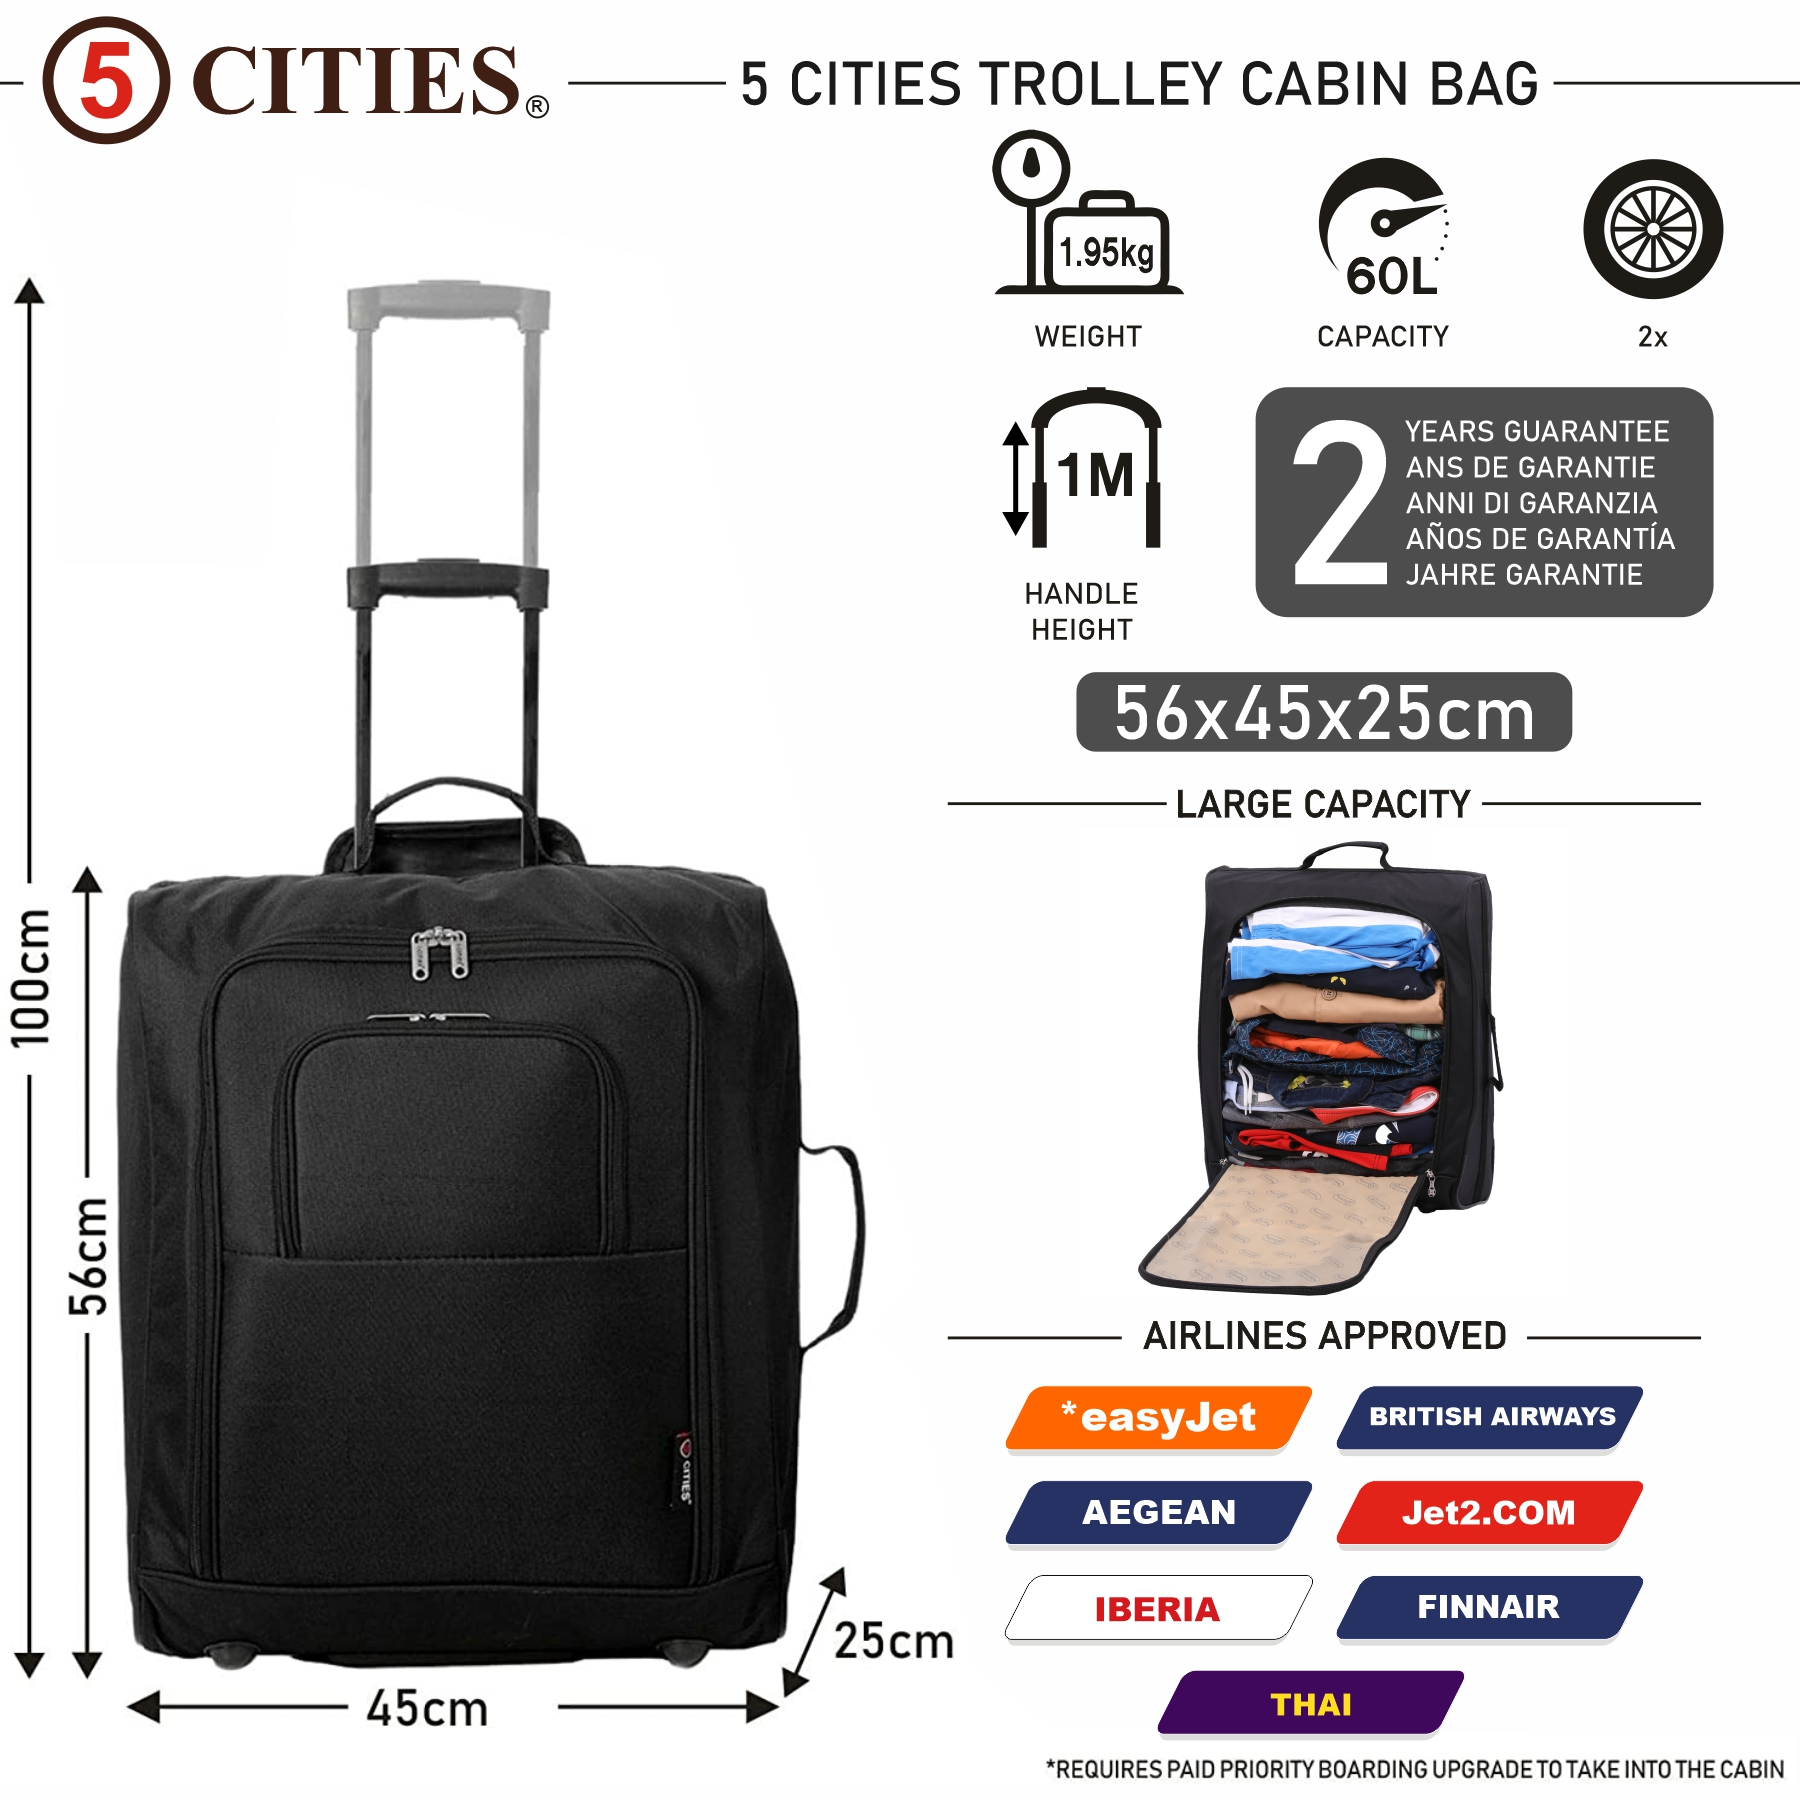 All you need to know about our cabin baggage policy